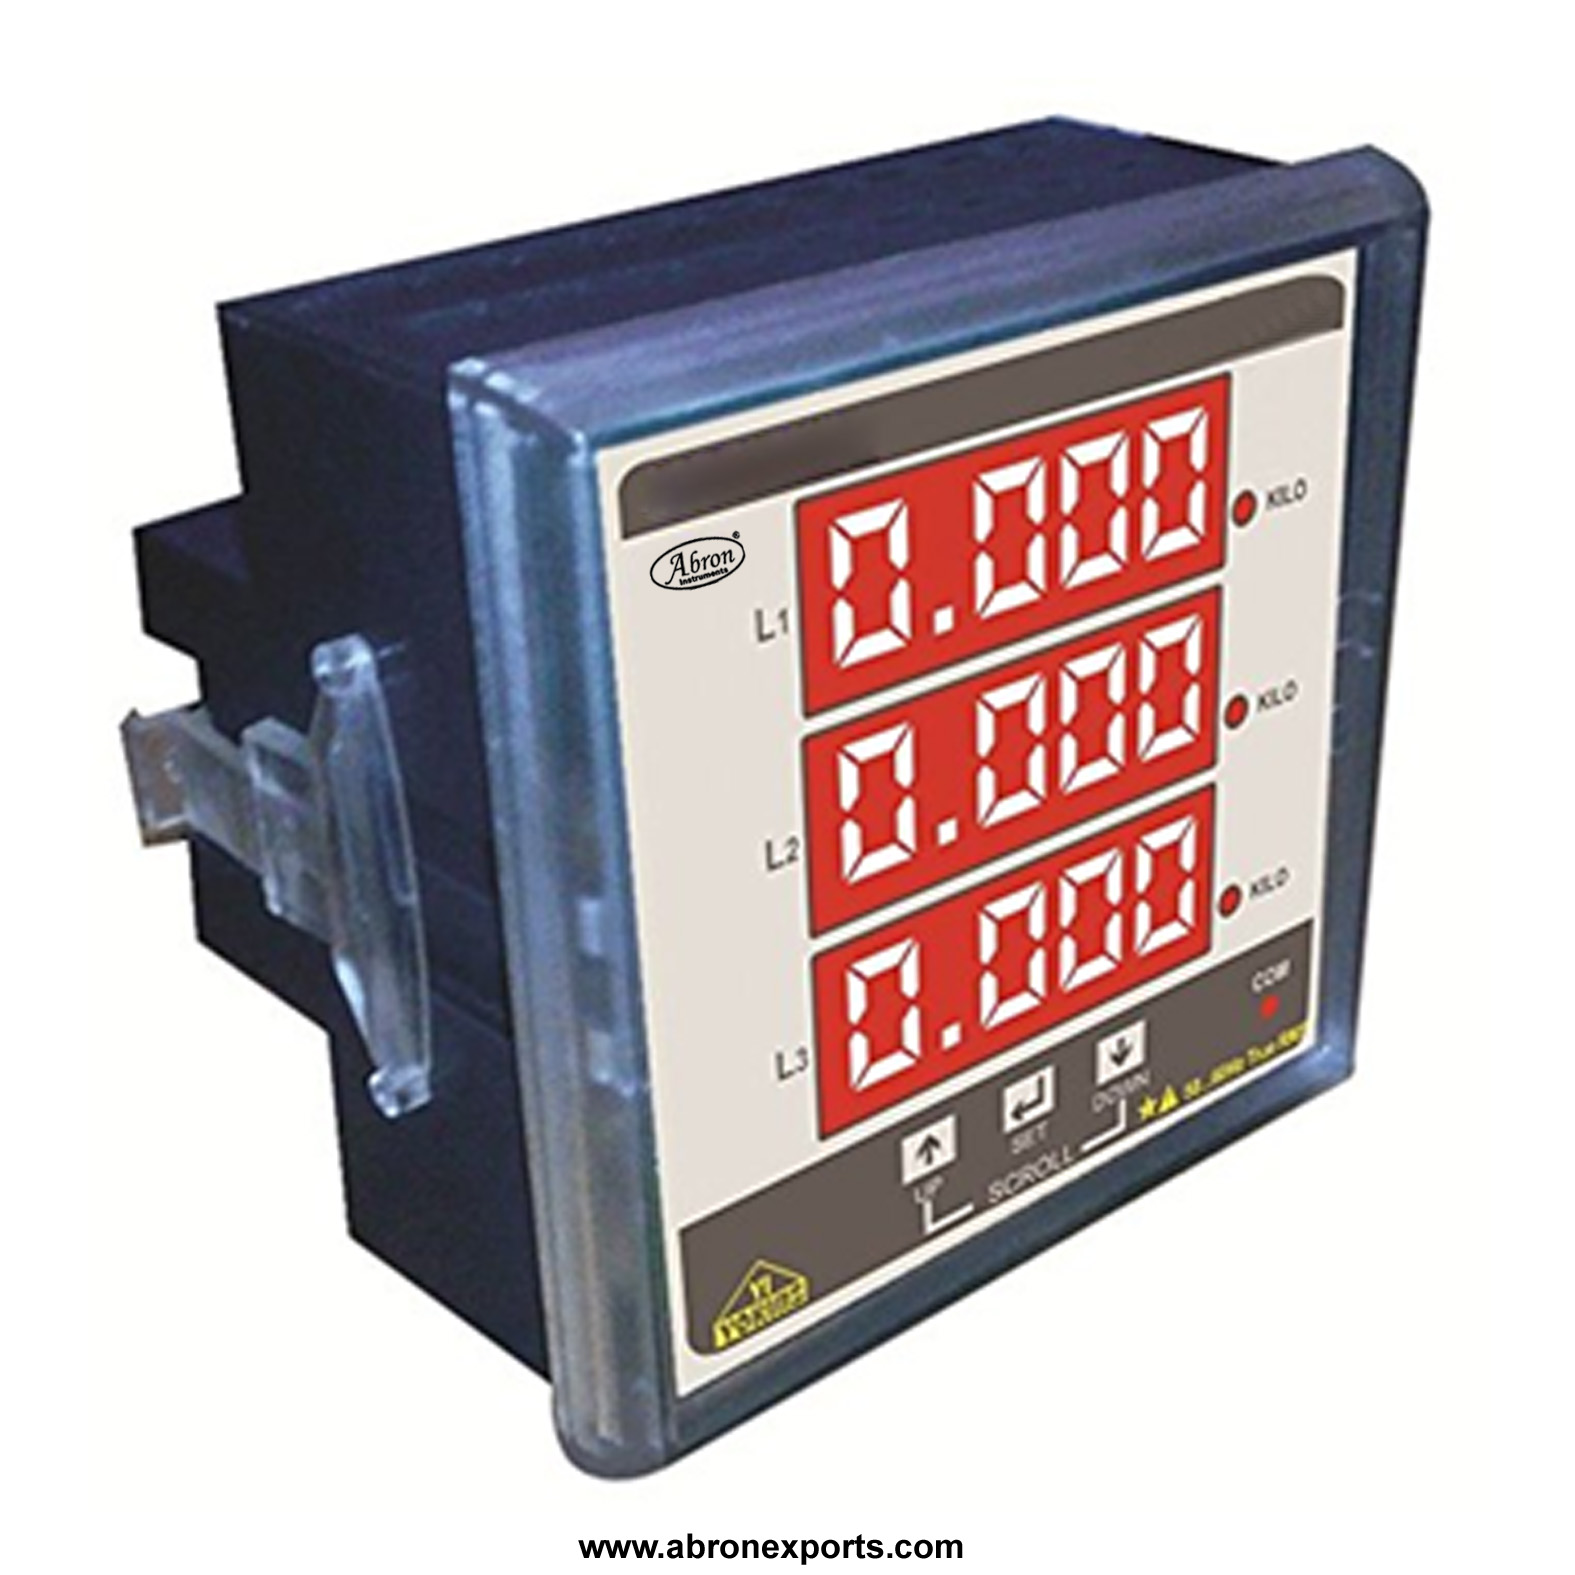 Power Factor Energy Meter Three Phase Digital Panel Mounting 5 Amp 96mm/144mm AE-1324D3